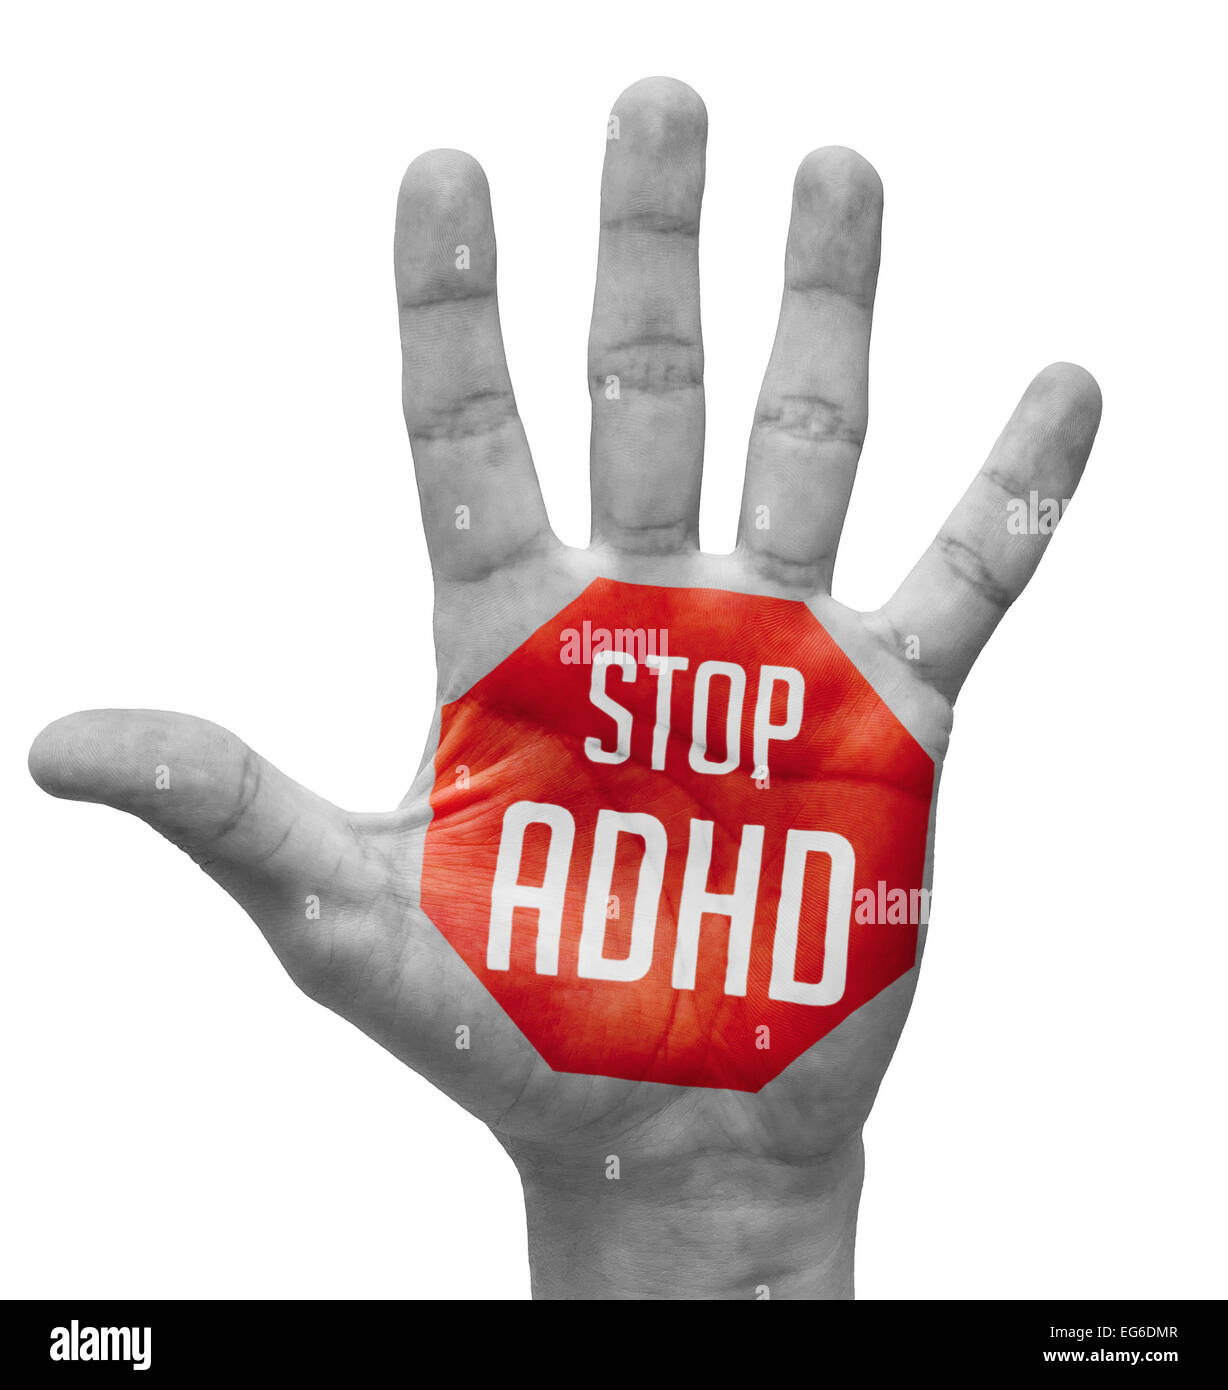 Stop ADHD - Red Sign Painted - Open Hand Raised, Isolated on White Background. Stock Photo